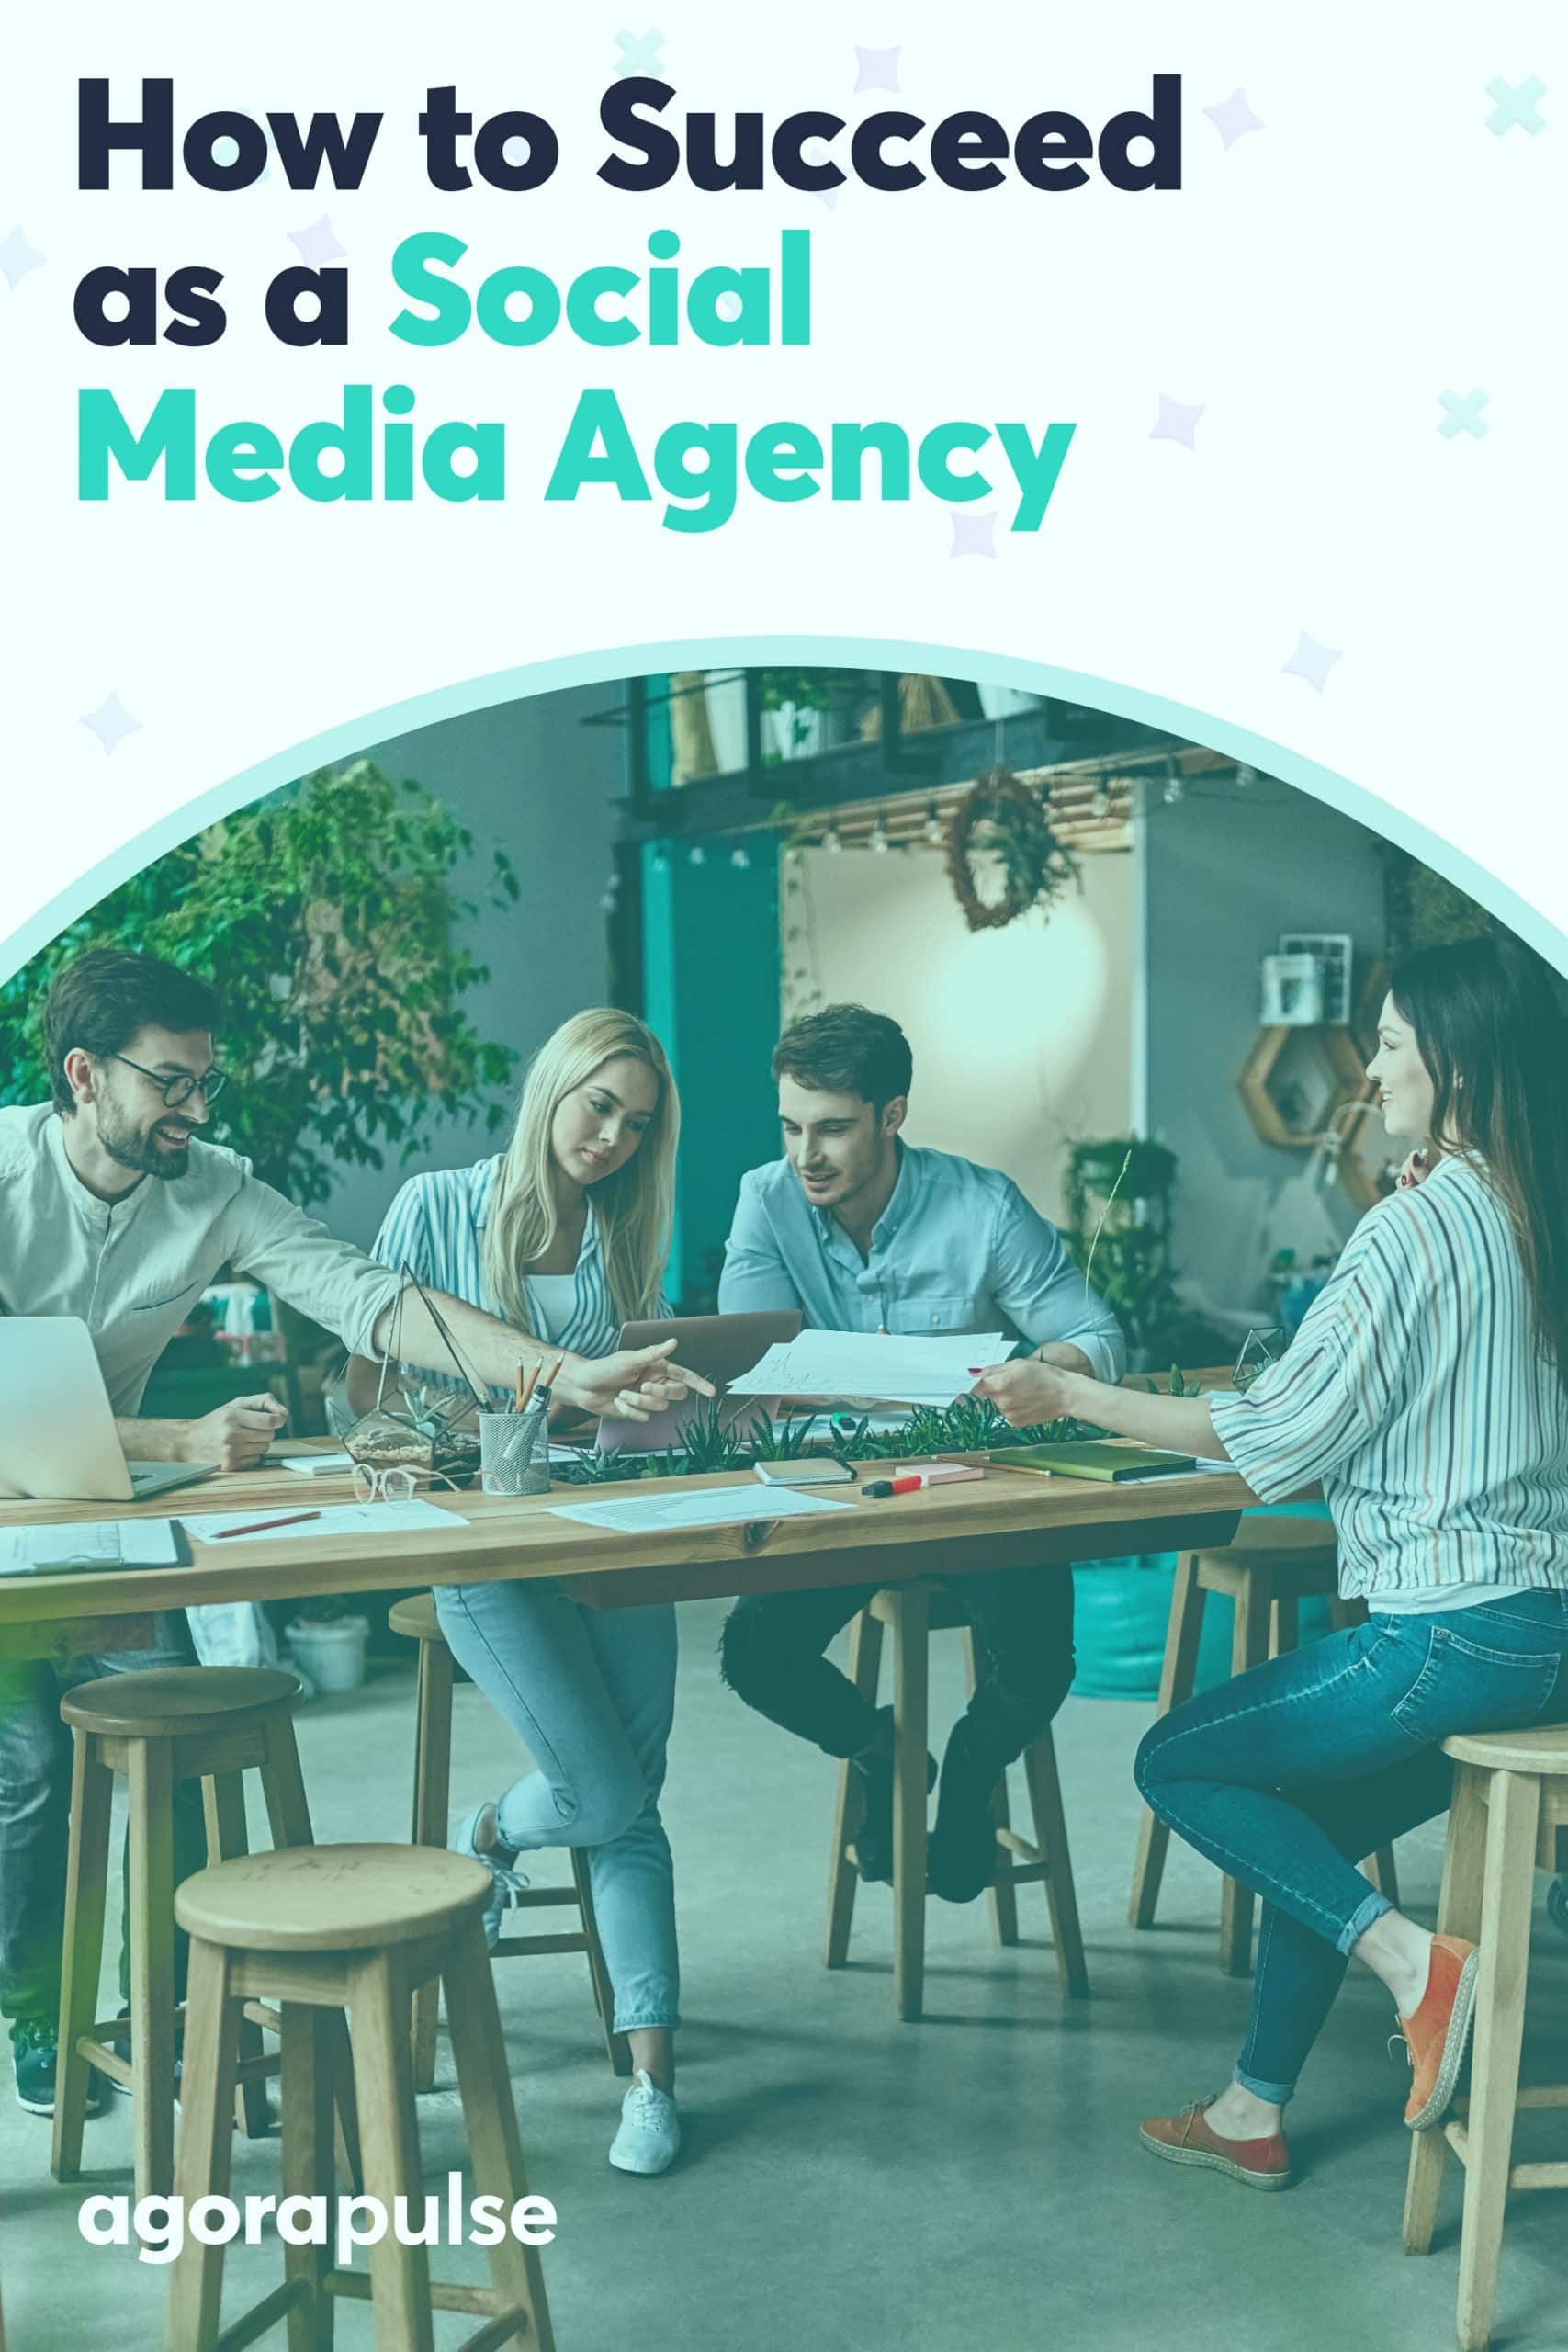 How to Succeed as a Social Media Agency: Tips for Newbies and Pros